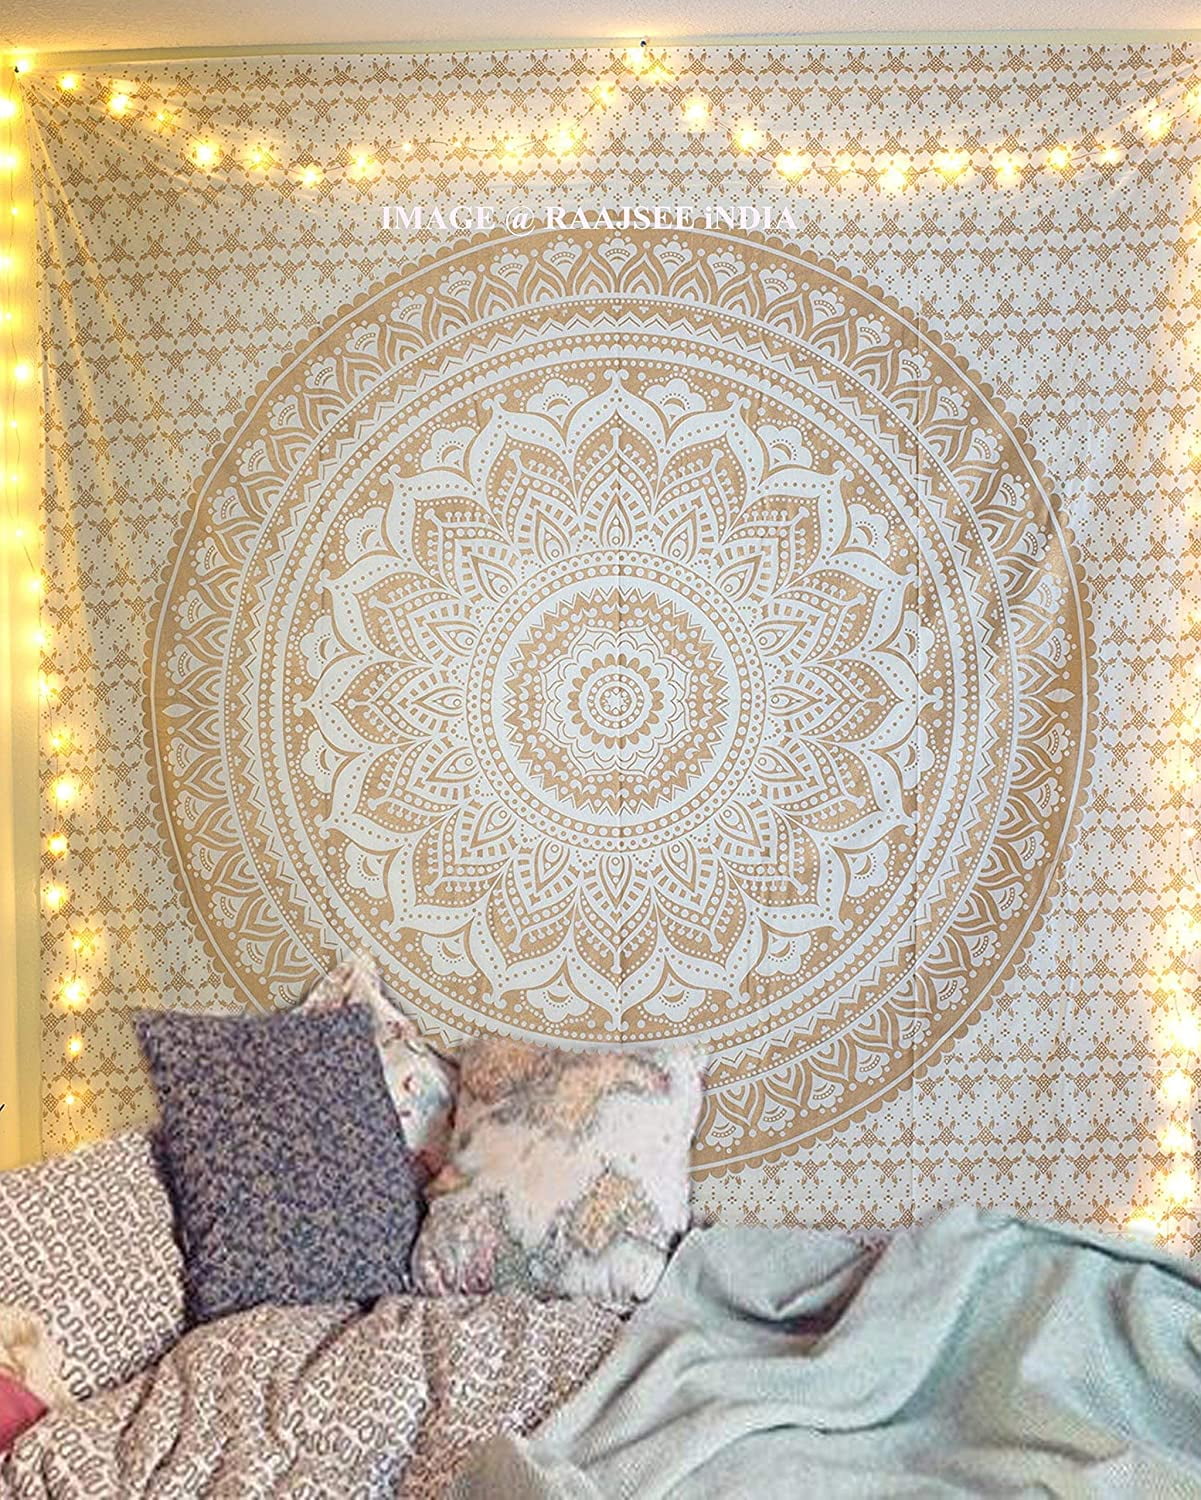 100% Cotton Ombre Mandala Tapestry Wall Hanging Hippy Throw Bohemian Bedspread 